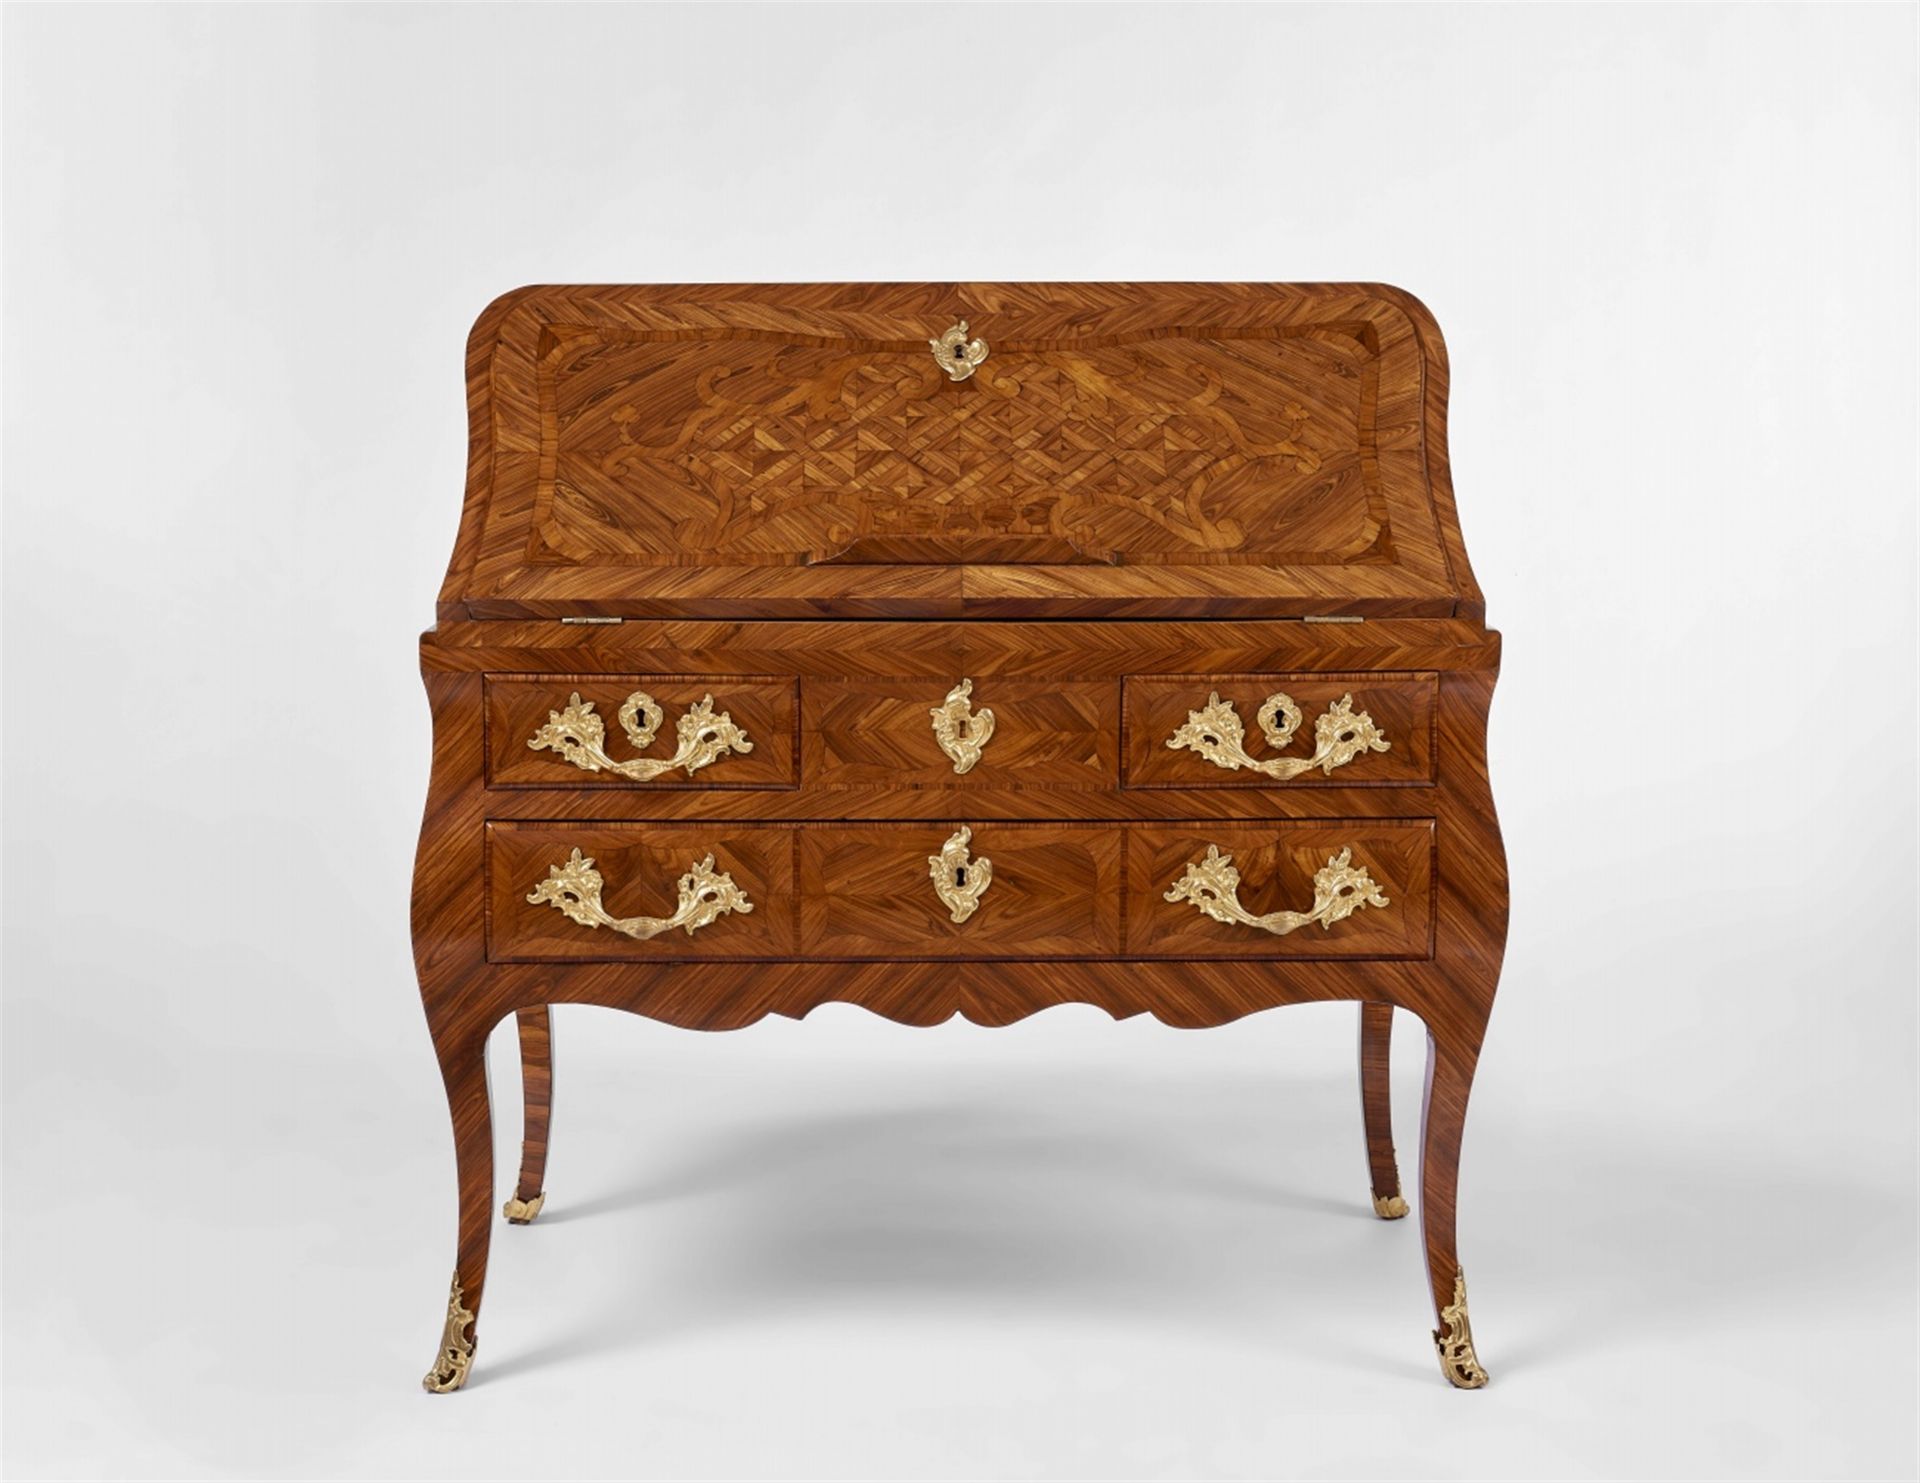 A Montbéliard marquetry bureau with the stamp of Abraham-Nicolas Couleru